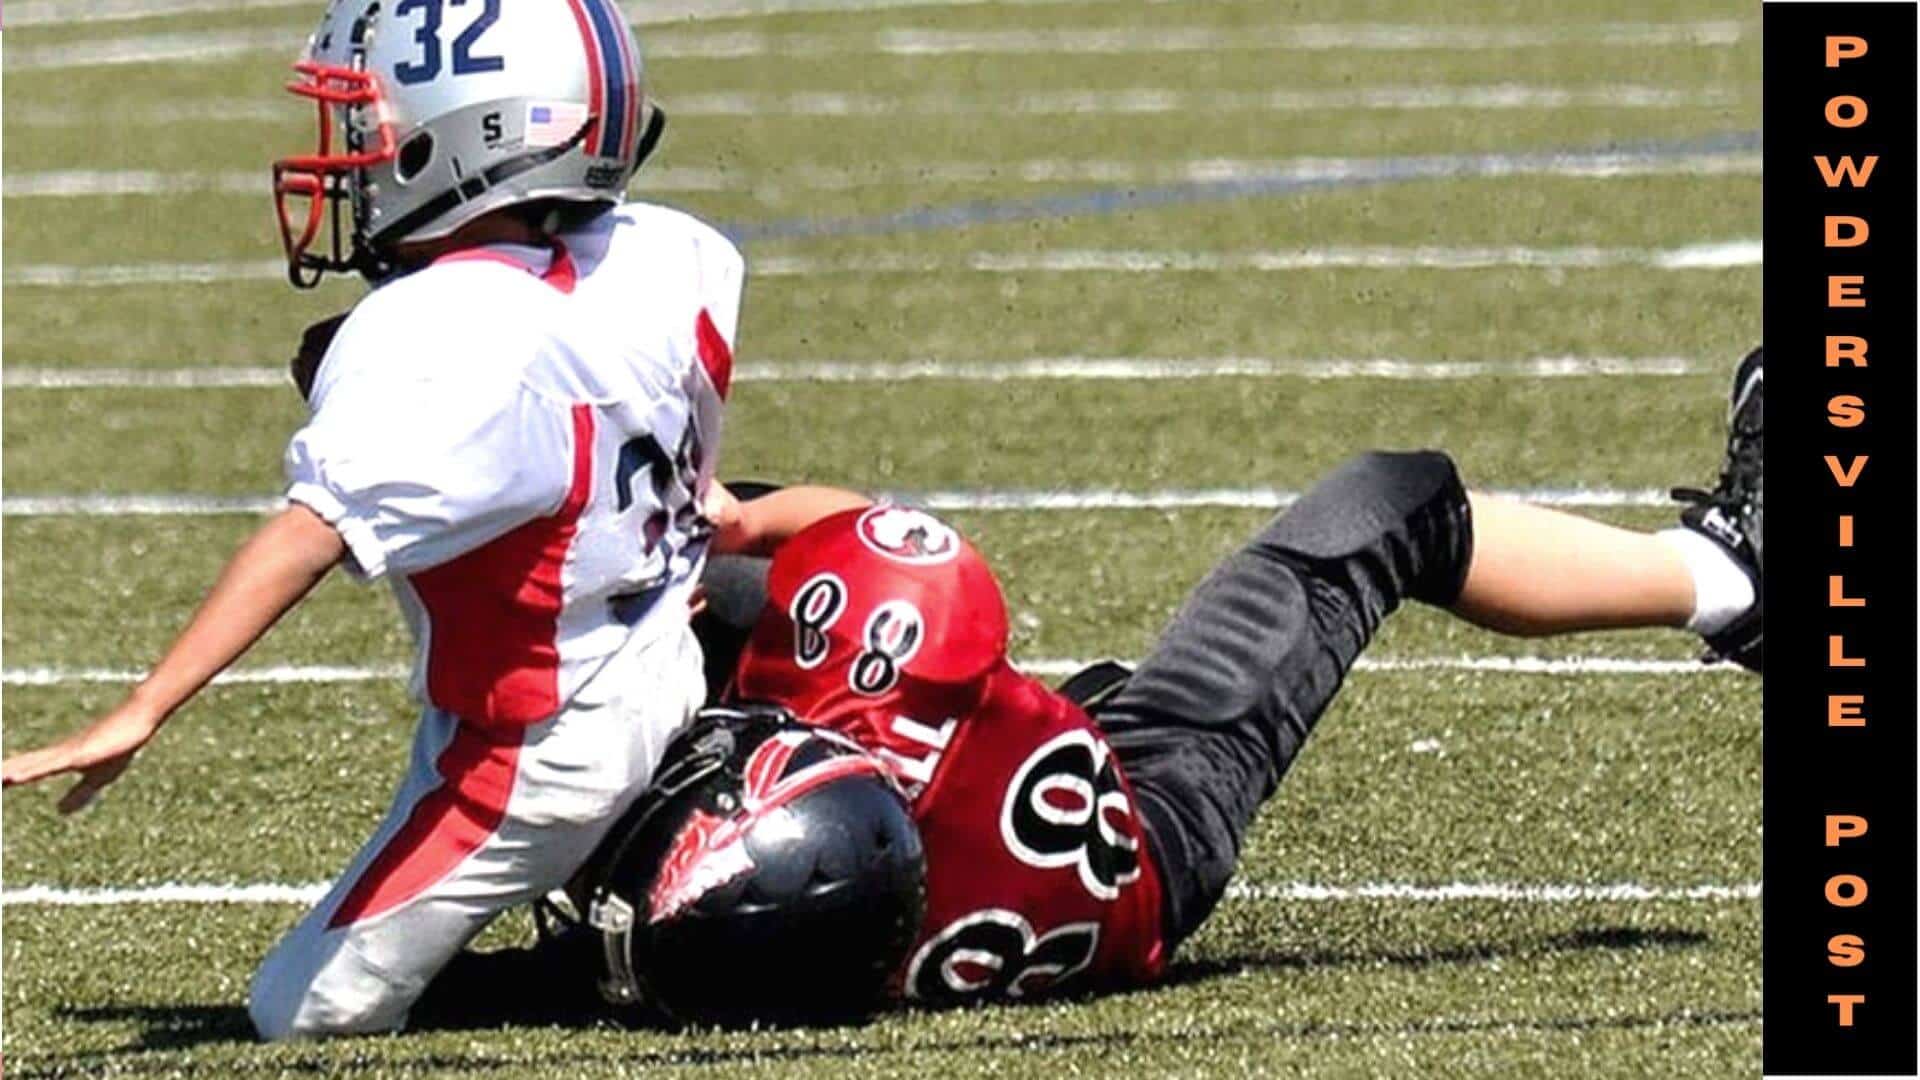 No Links Between Brain Trauma and Youth Tackle Football